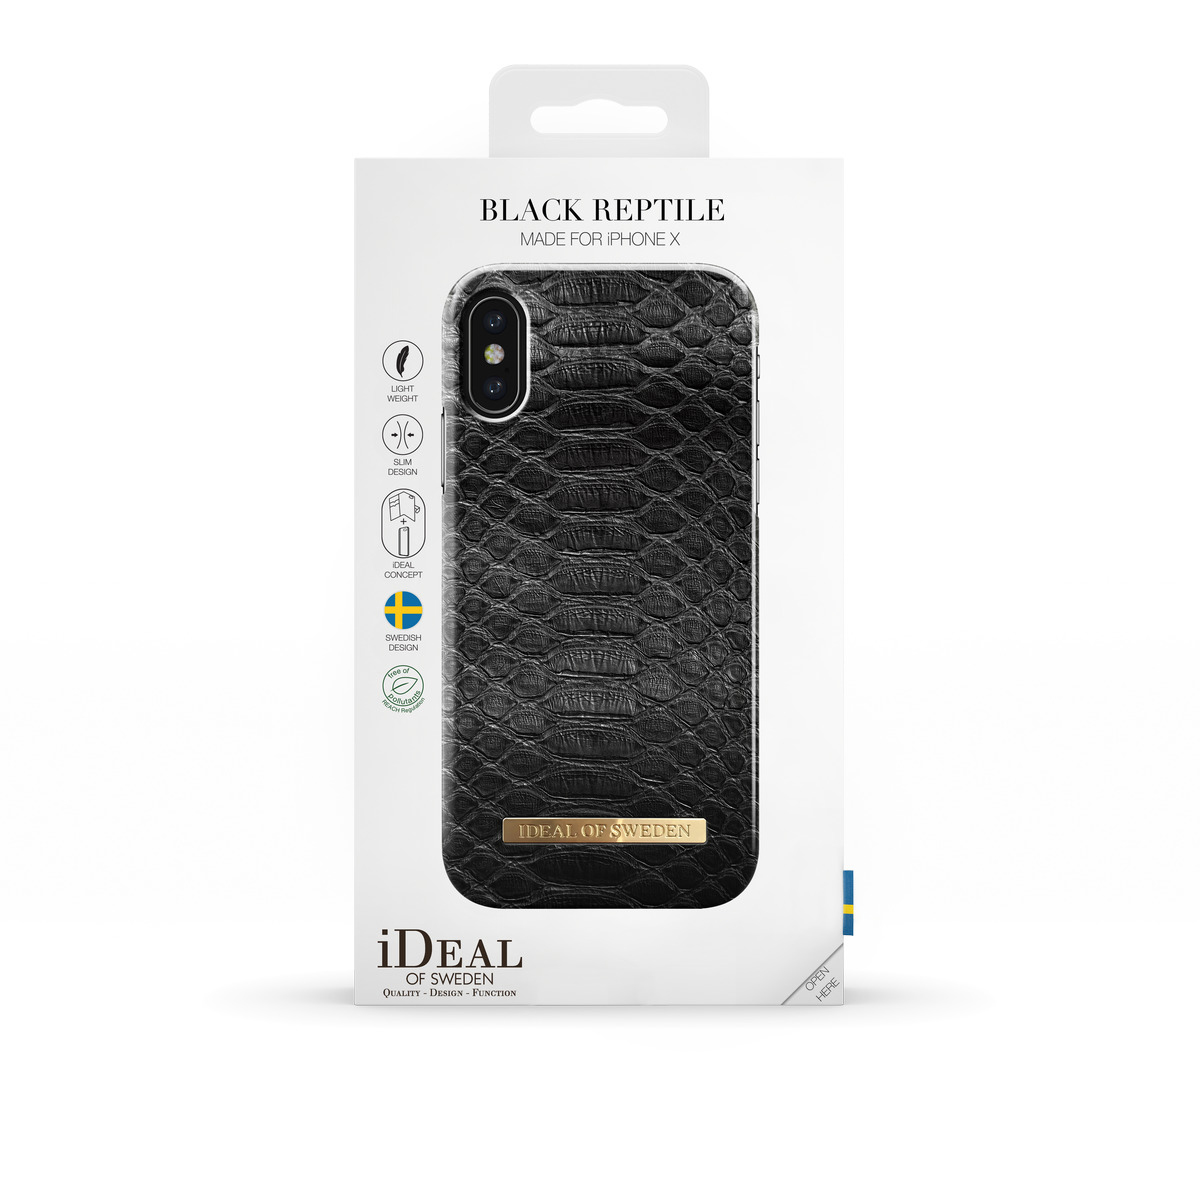 IDEAL OF X, Apple, SWEDEN iPhone Backcover, Reptile Fashion, Black